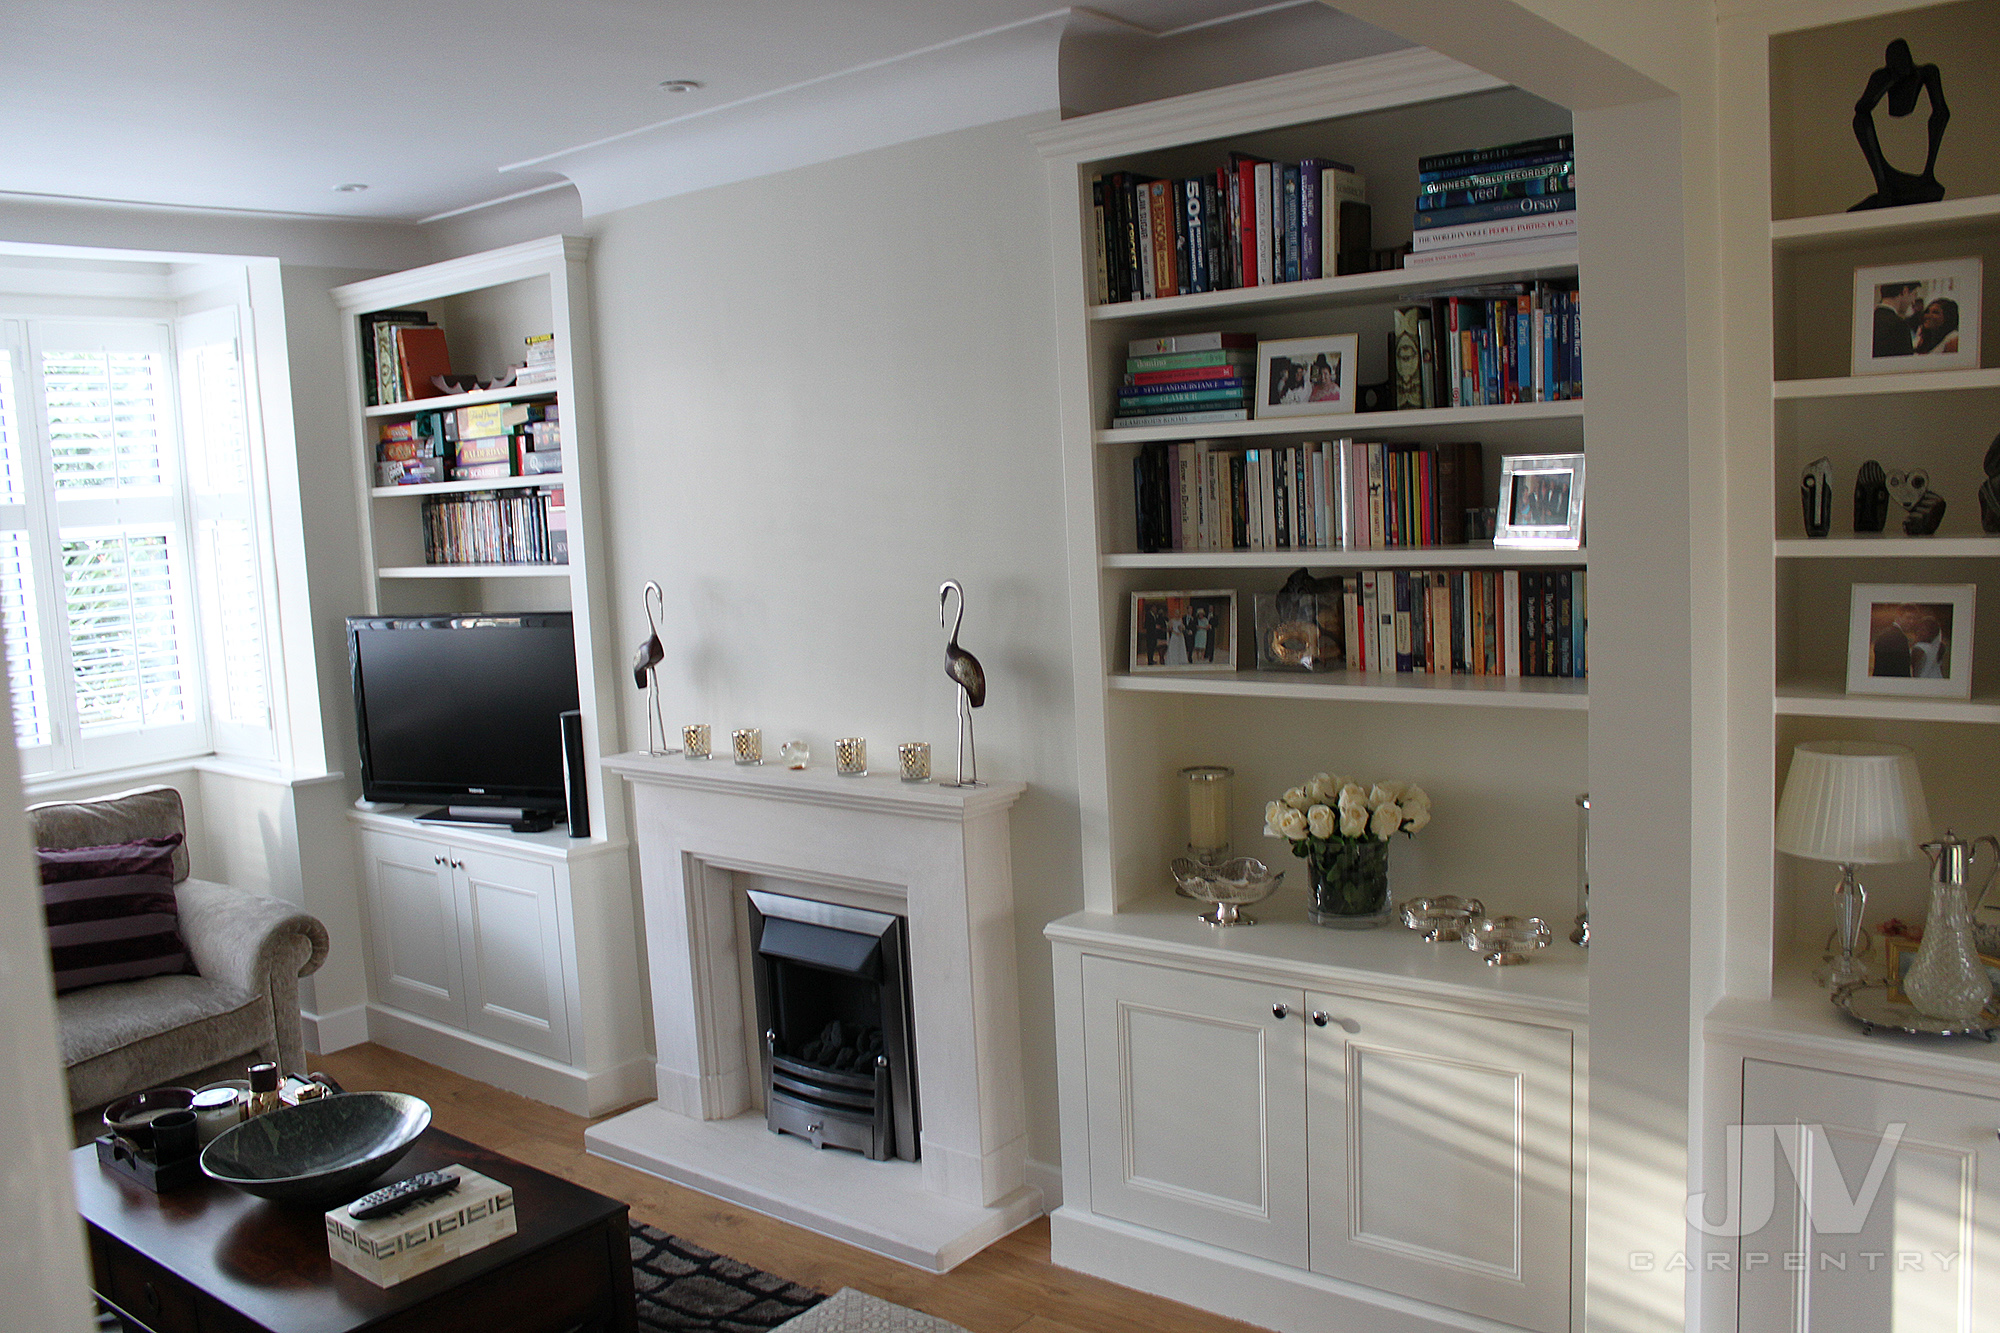 Traditional Living room alcoves shelving with cabinets